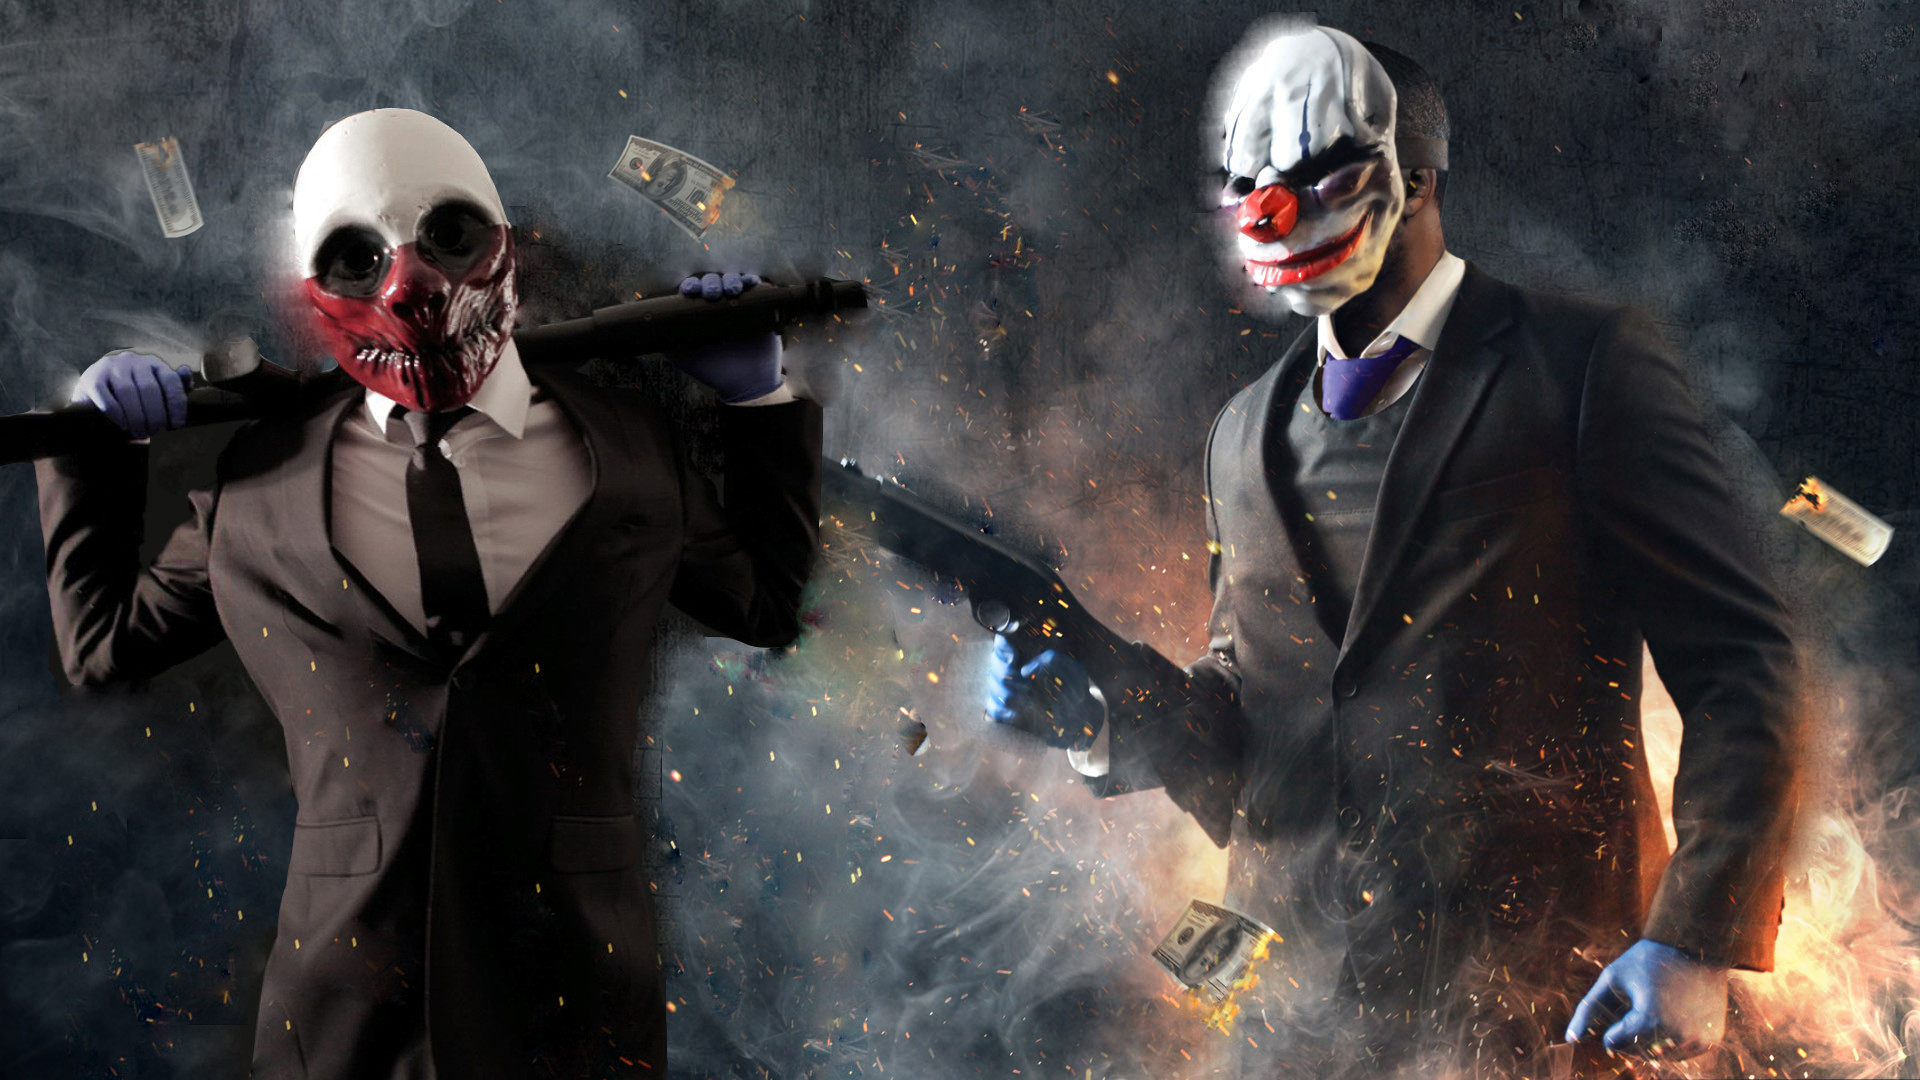 1920x1080 DaveCreator 17 0 Payday 2 Chains and Wolf Custom Wallpaper by DaveCreator